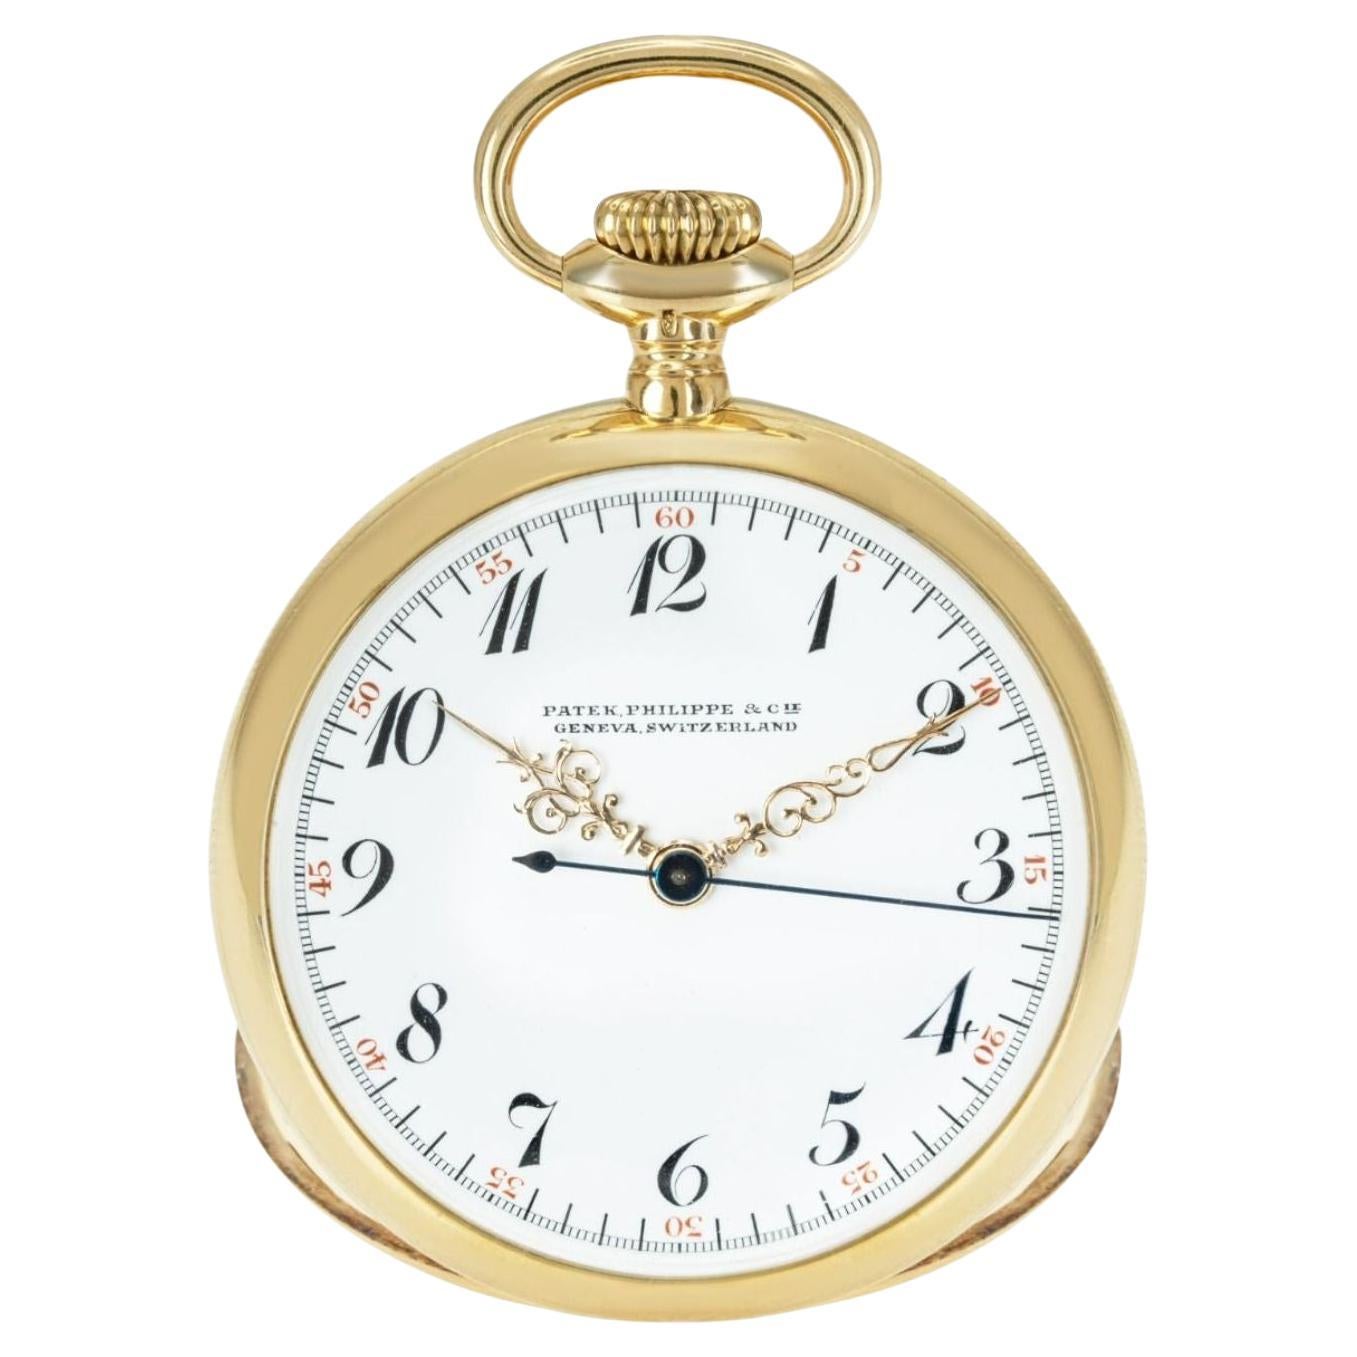 Rare Patek Philippe 18ct Gold Centre Second Keyless Lever Open Face Pocket Watch